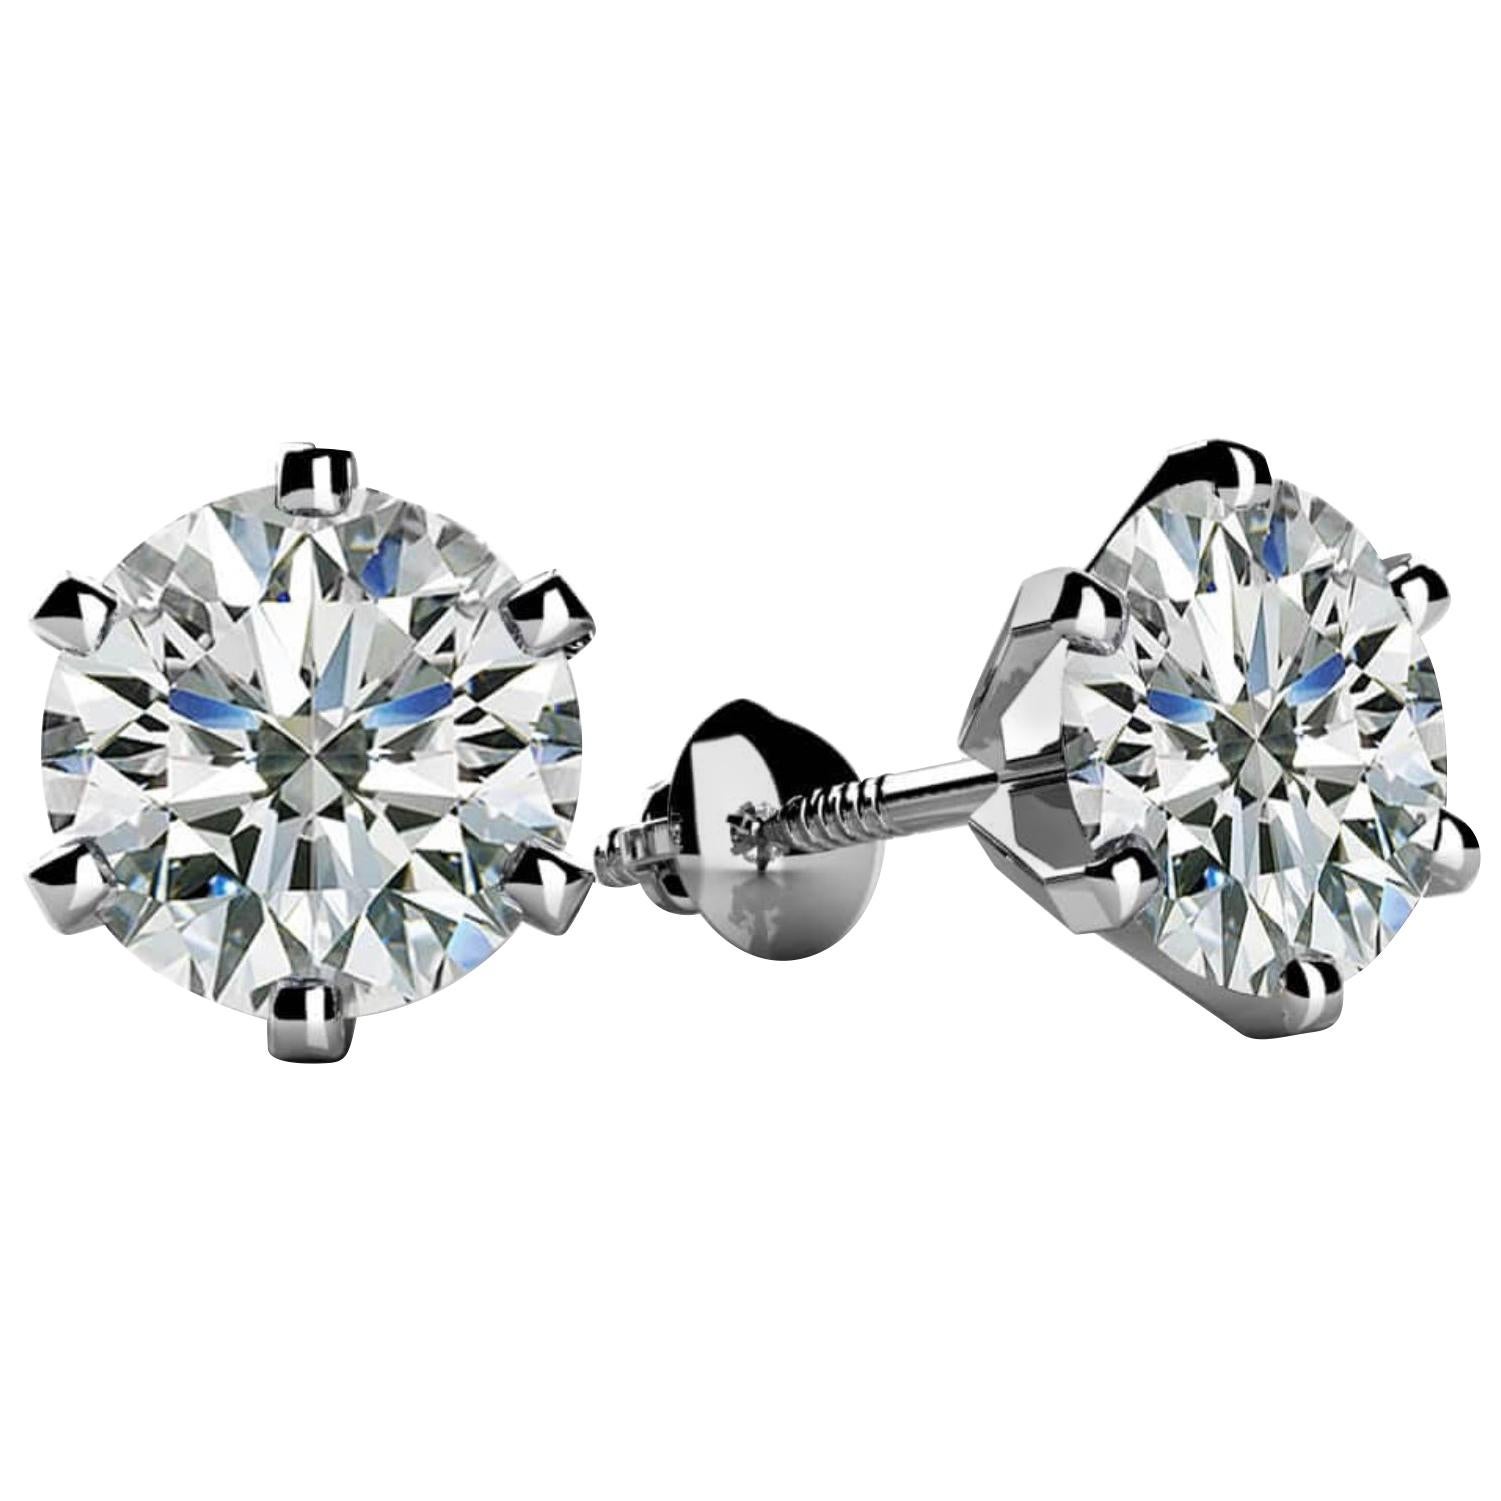 A sweet, shimmery style for any day of the week. These stud earrings 50 pointer Solitaire round brilliant-cut diamonds. 
Set in 14 kt Yellow gold. Post, Screw back diamond  stud earrings.
Best For Every day , home and work 
Total Diamond weight 1 ct